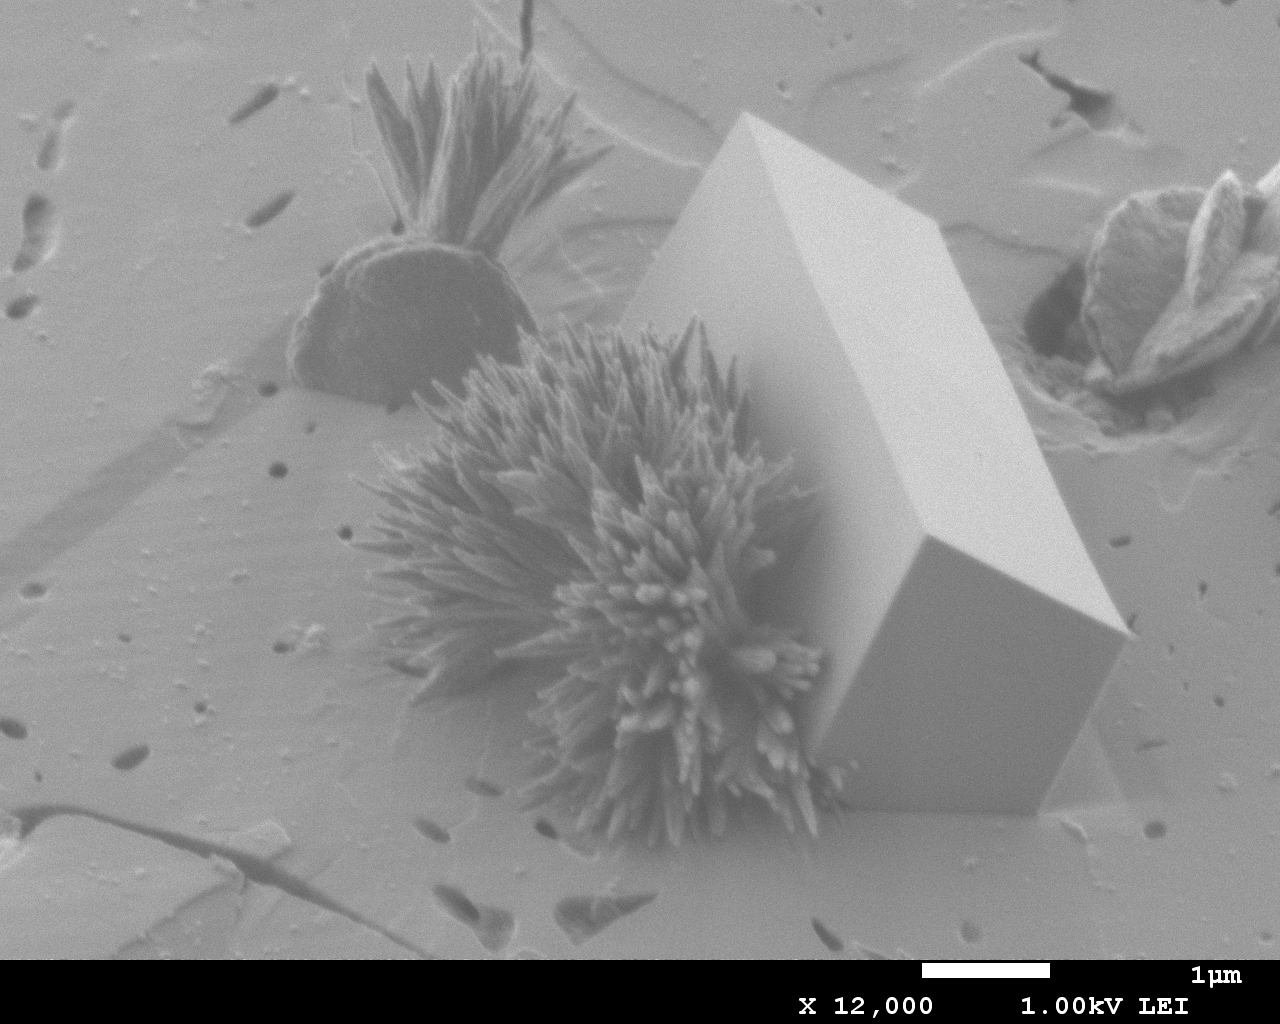 High resolution secondary electron micrograph of calcite and early C-S-H on a beta-dicalcium silicate surface